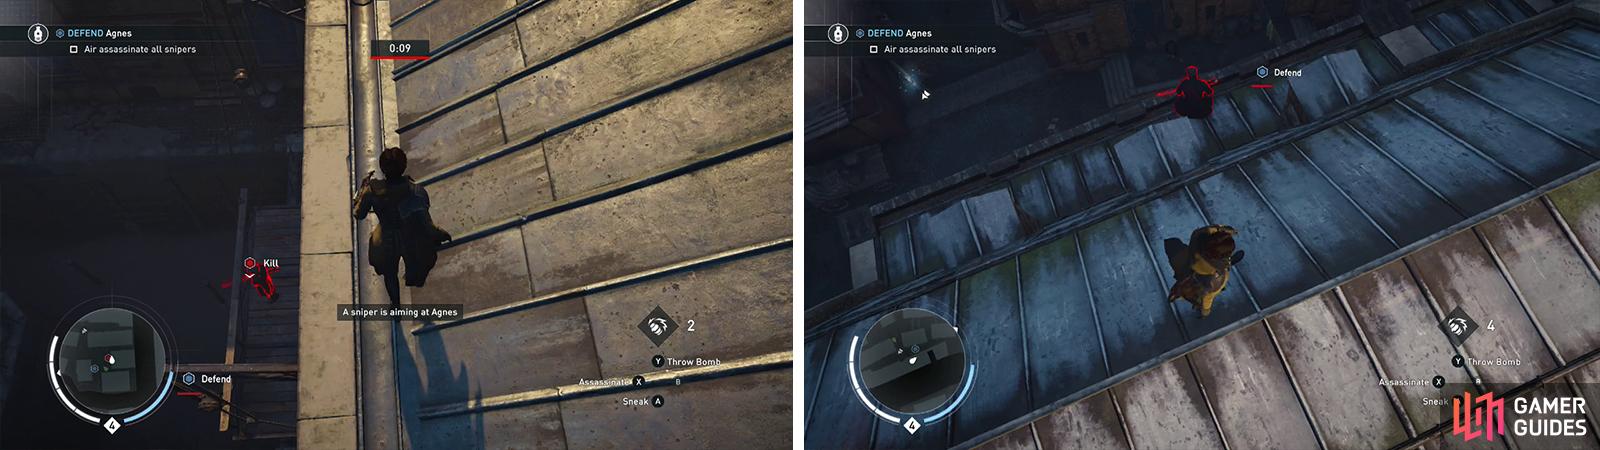 You'll need to climb up and air assassinate each of the Snipers for the optional objective. Sniper 1 (left) and Sniper 4 (right) pictured.